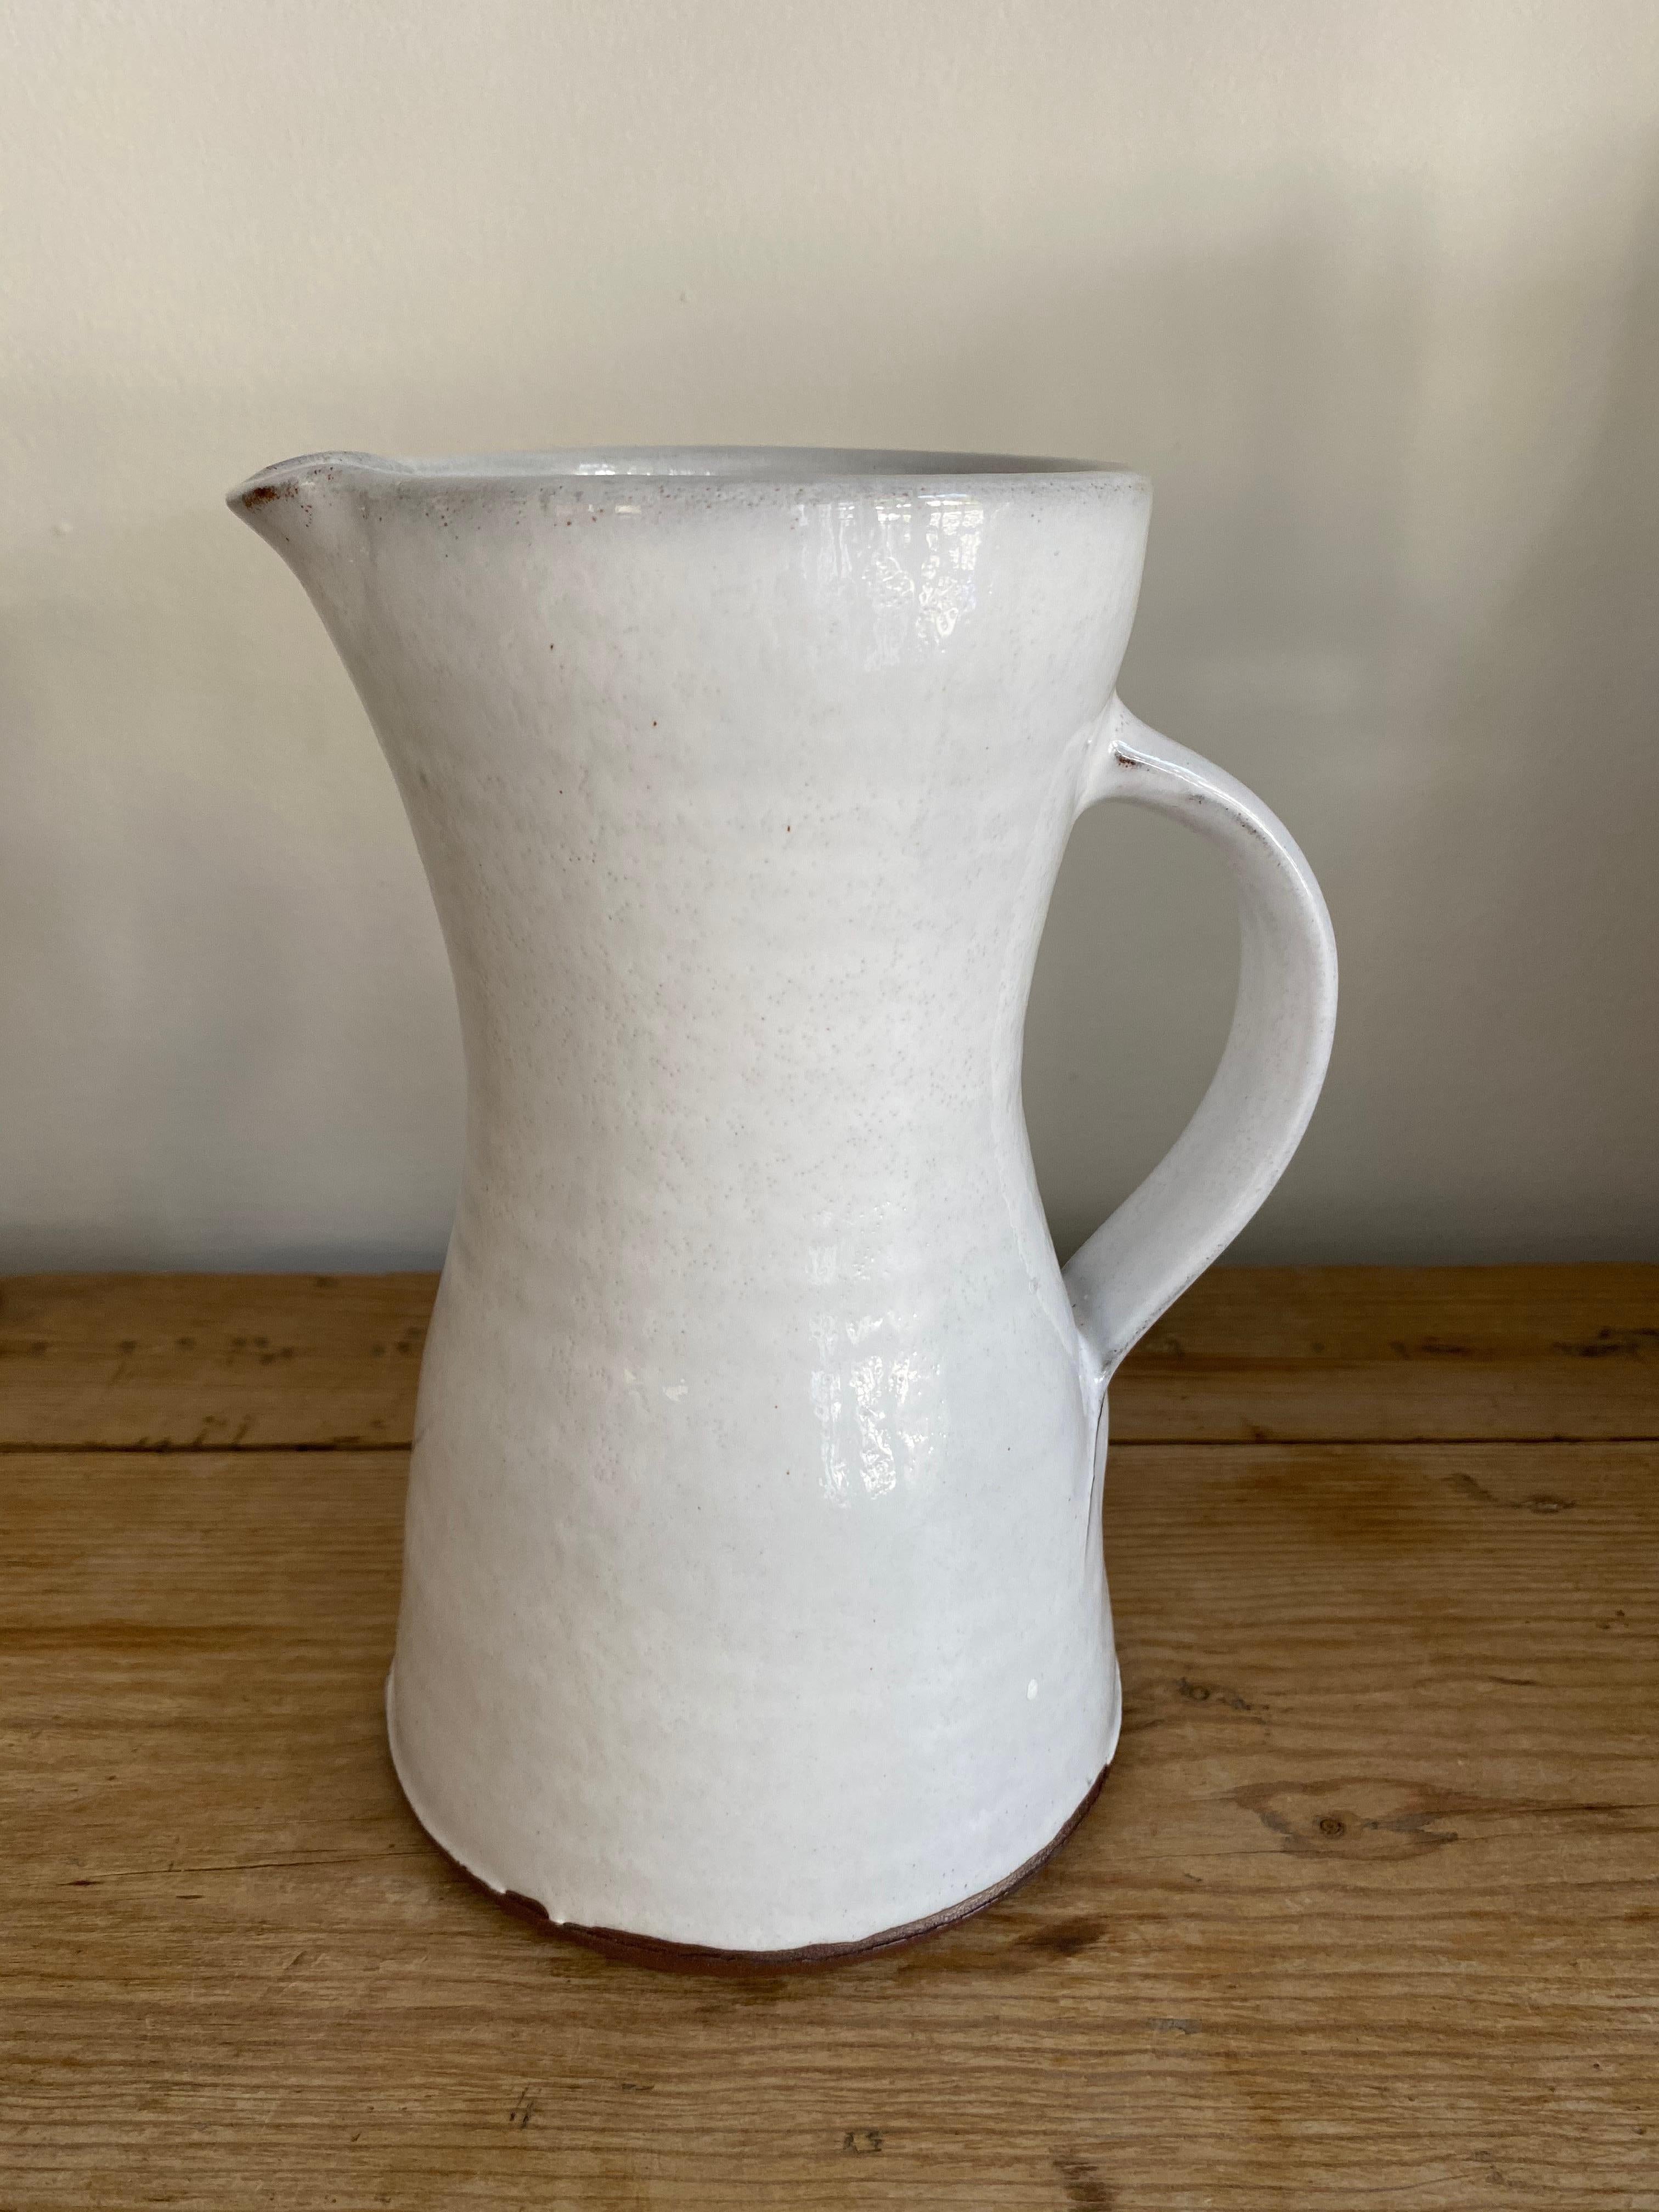 Handcrafted stoneware pitcher with white glaze by Mats Svensson

Sweden, 2010-2020. 
 